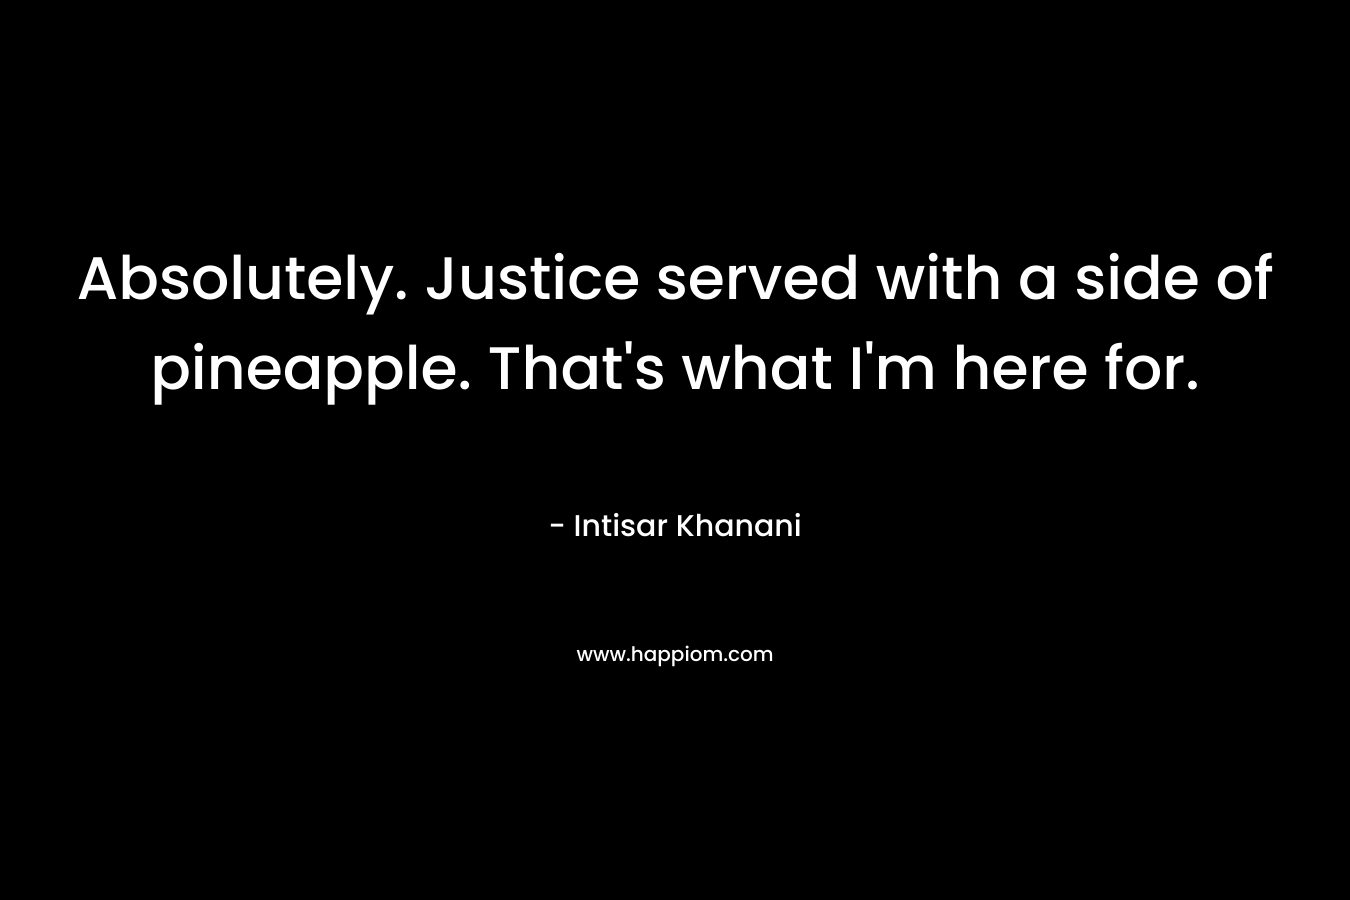 Absolutely. Justice served with a side of pineapple. That’s what I’m here for. – Intisar Khanani